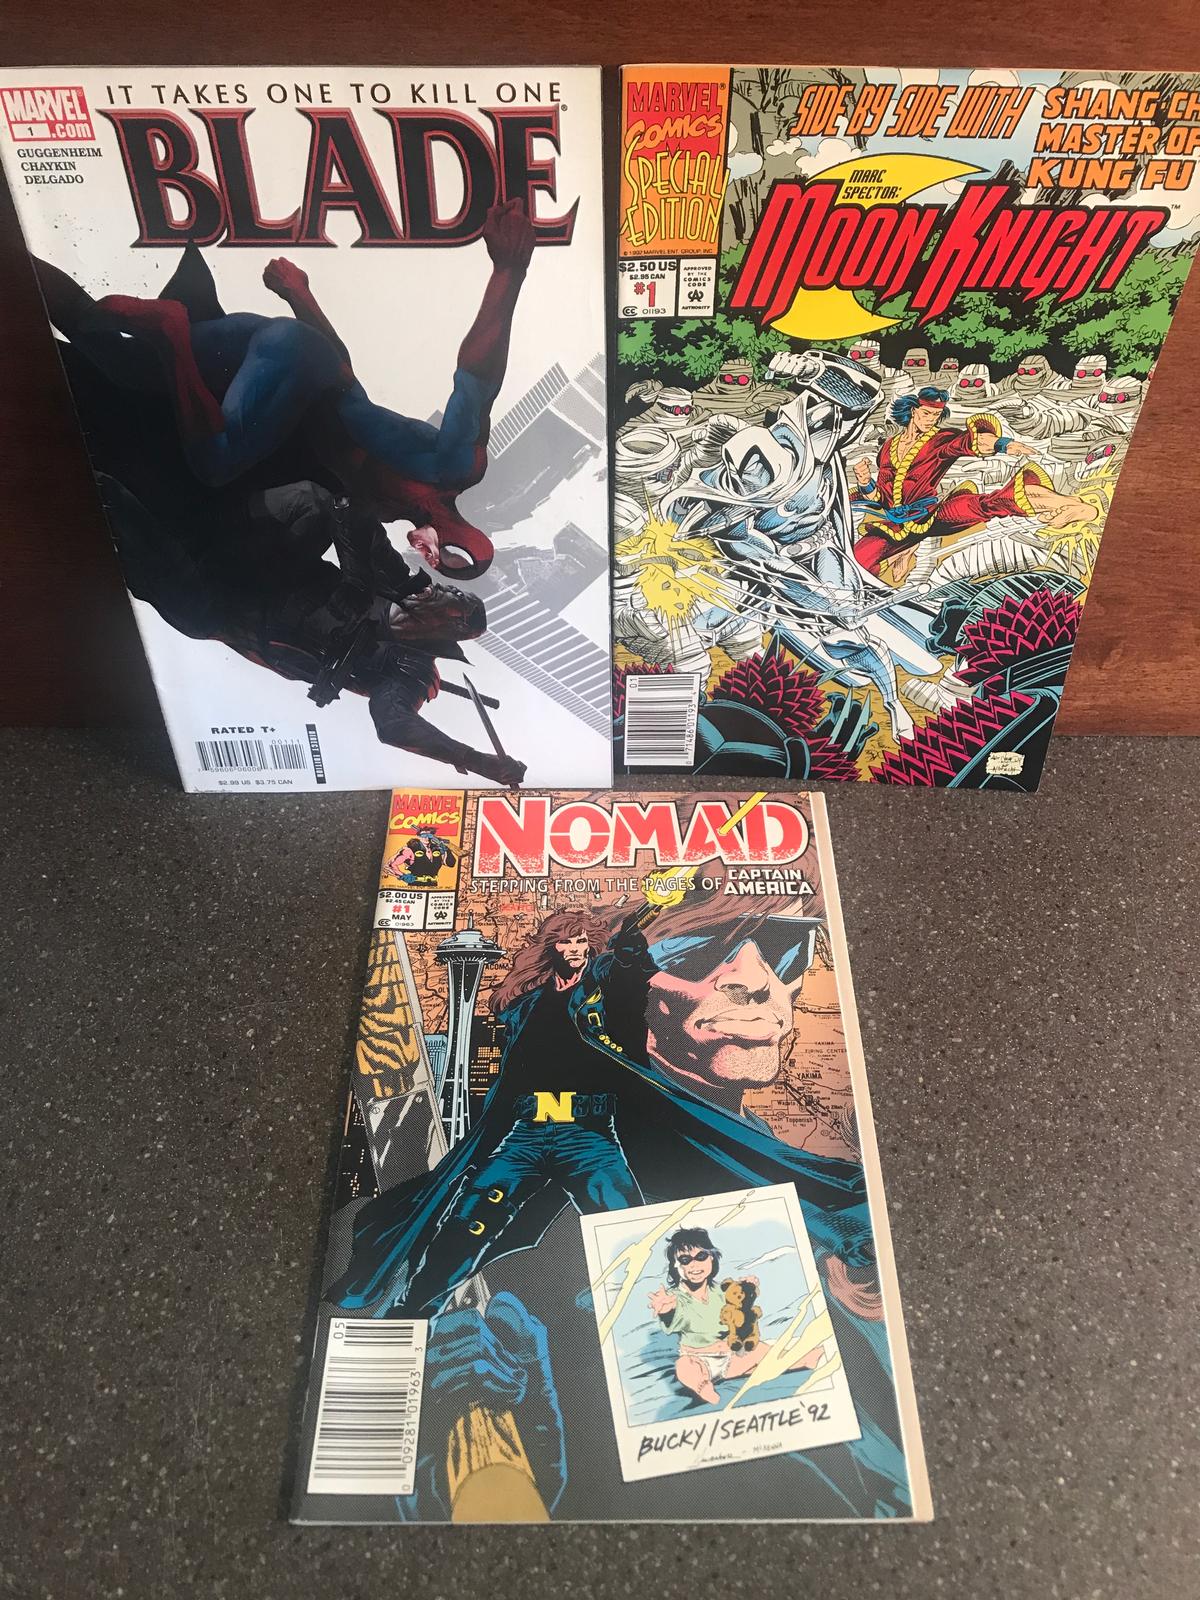 3 Issues Moon Knight #1 Nomad #1 Blade #1 KEY 1st Issues